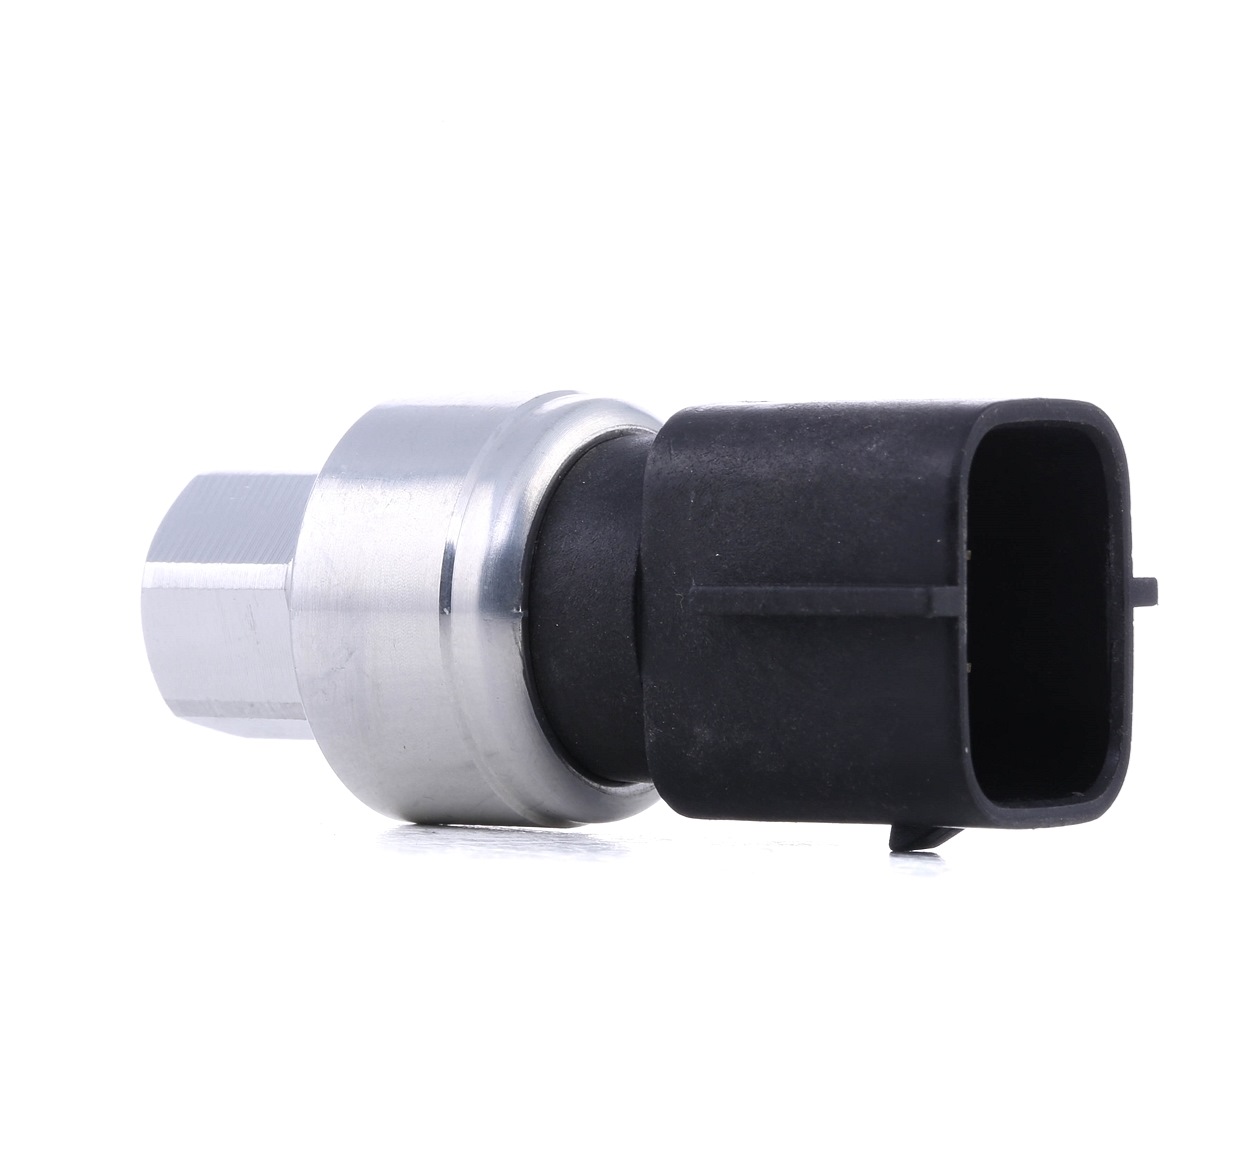 Air conditioning pressure switch THERMOTEC KTT130046 - Ford Fiesta Mk4 Van (JVS) Air conditioning spare parts order